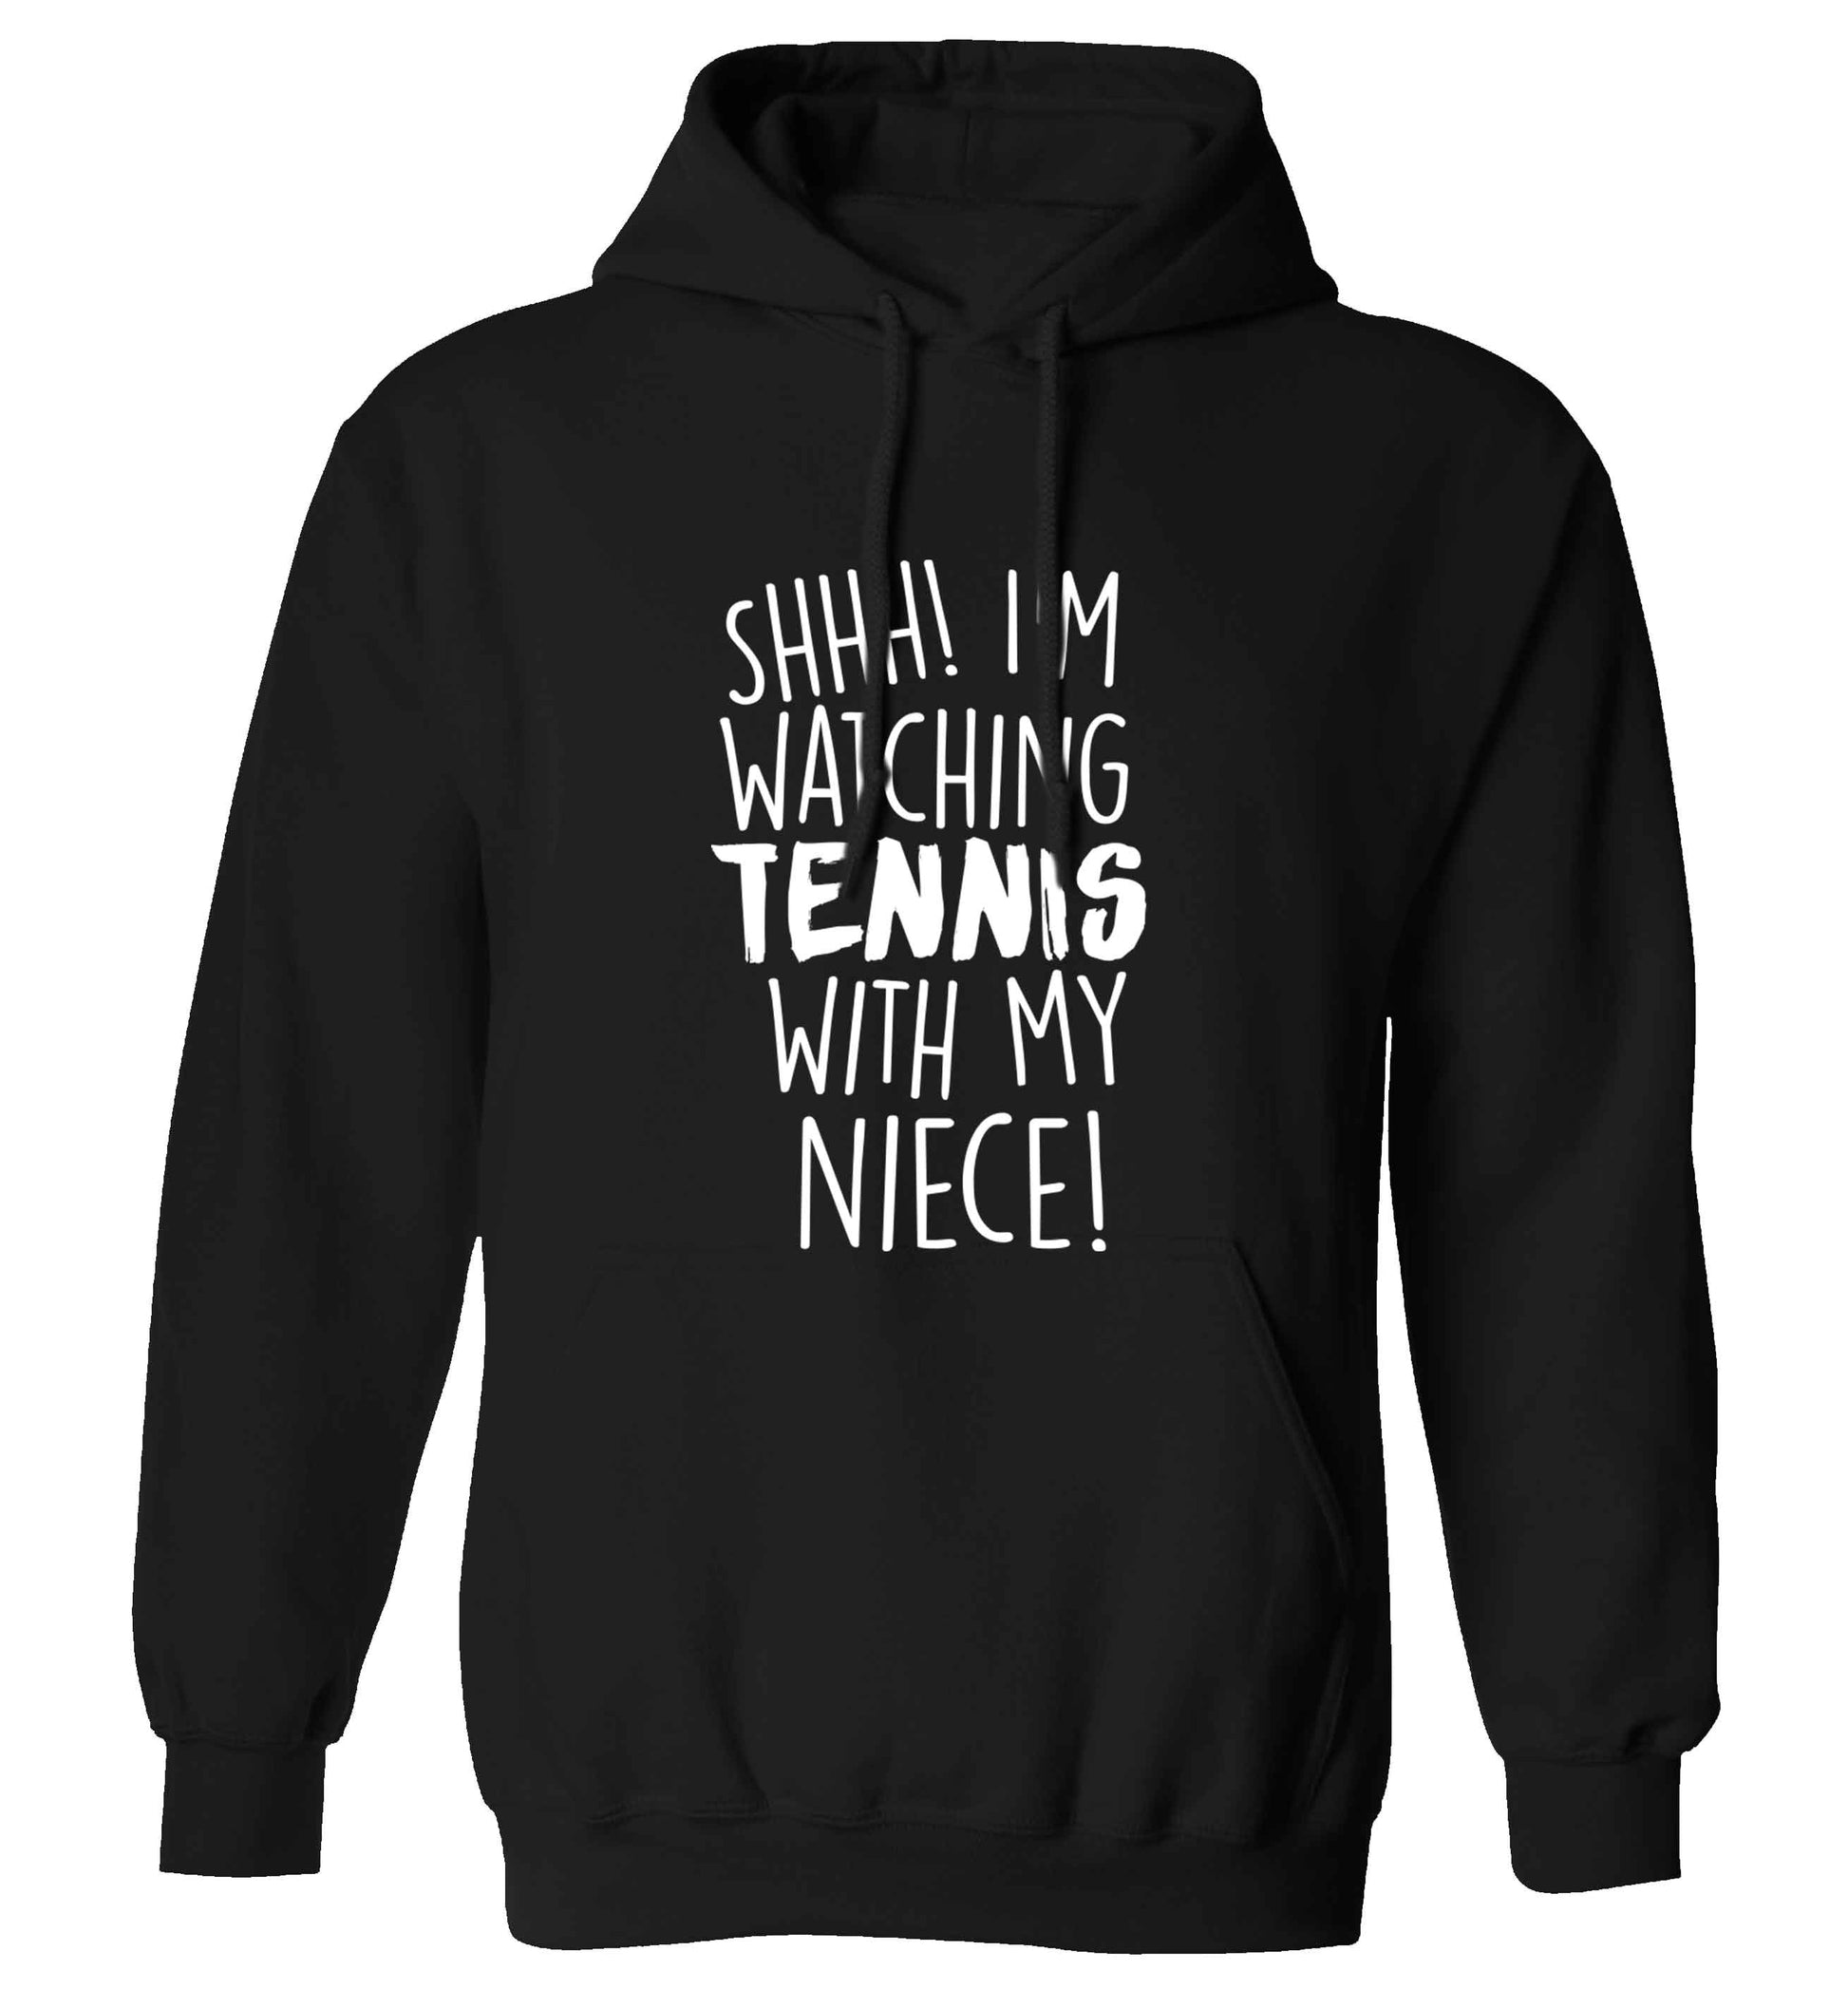 Shh! I'm watching tennis with my niece! adults unisex black hoodie 2XL